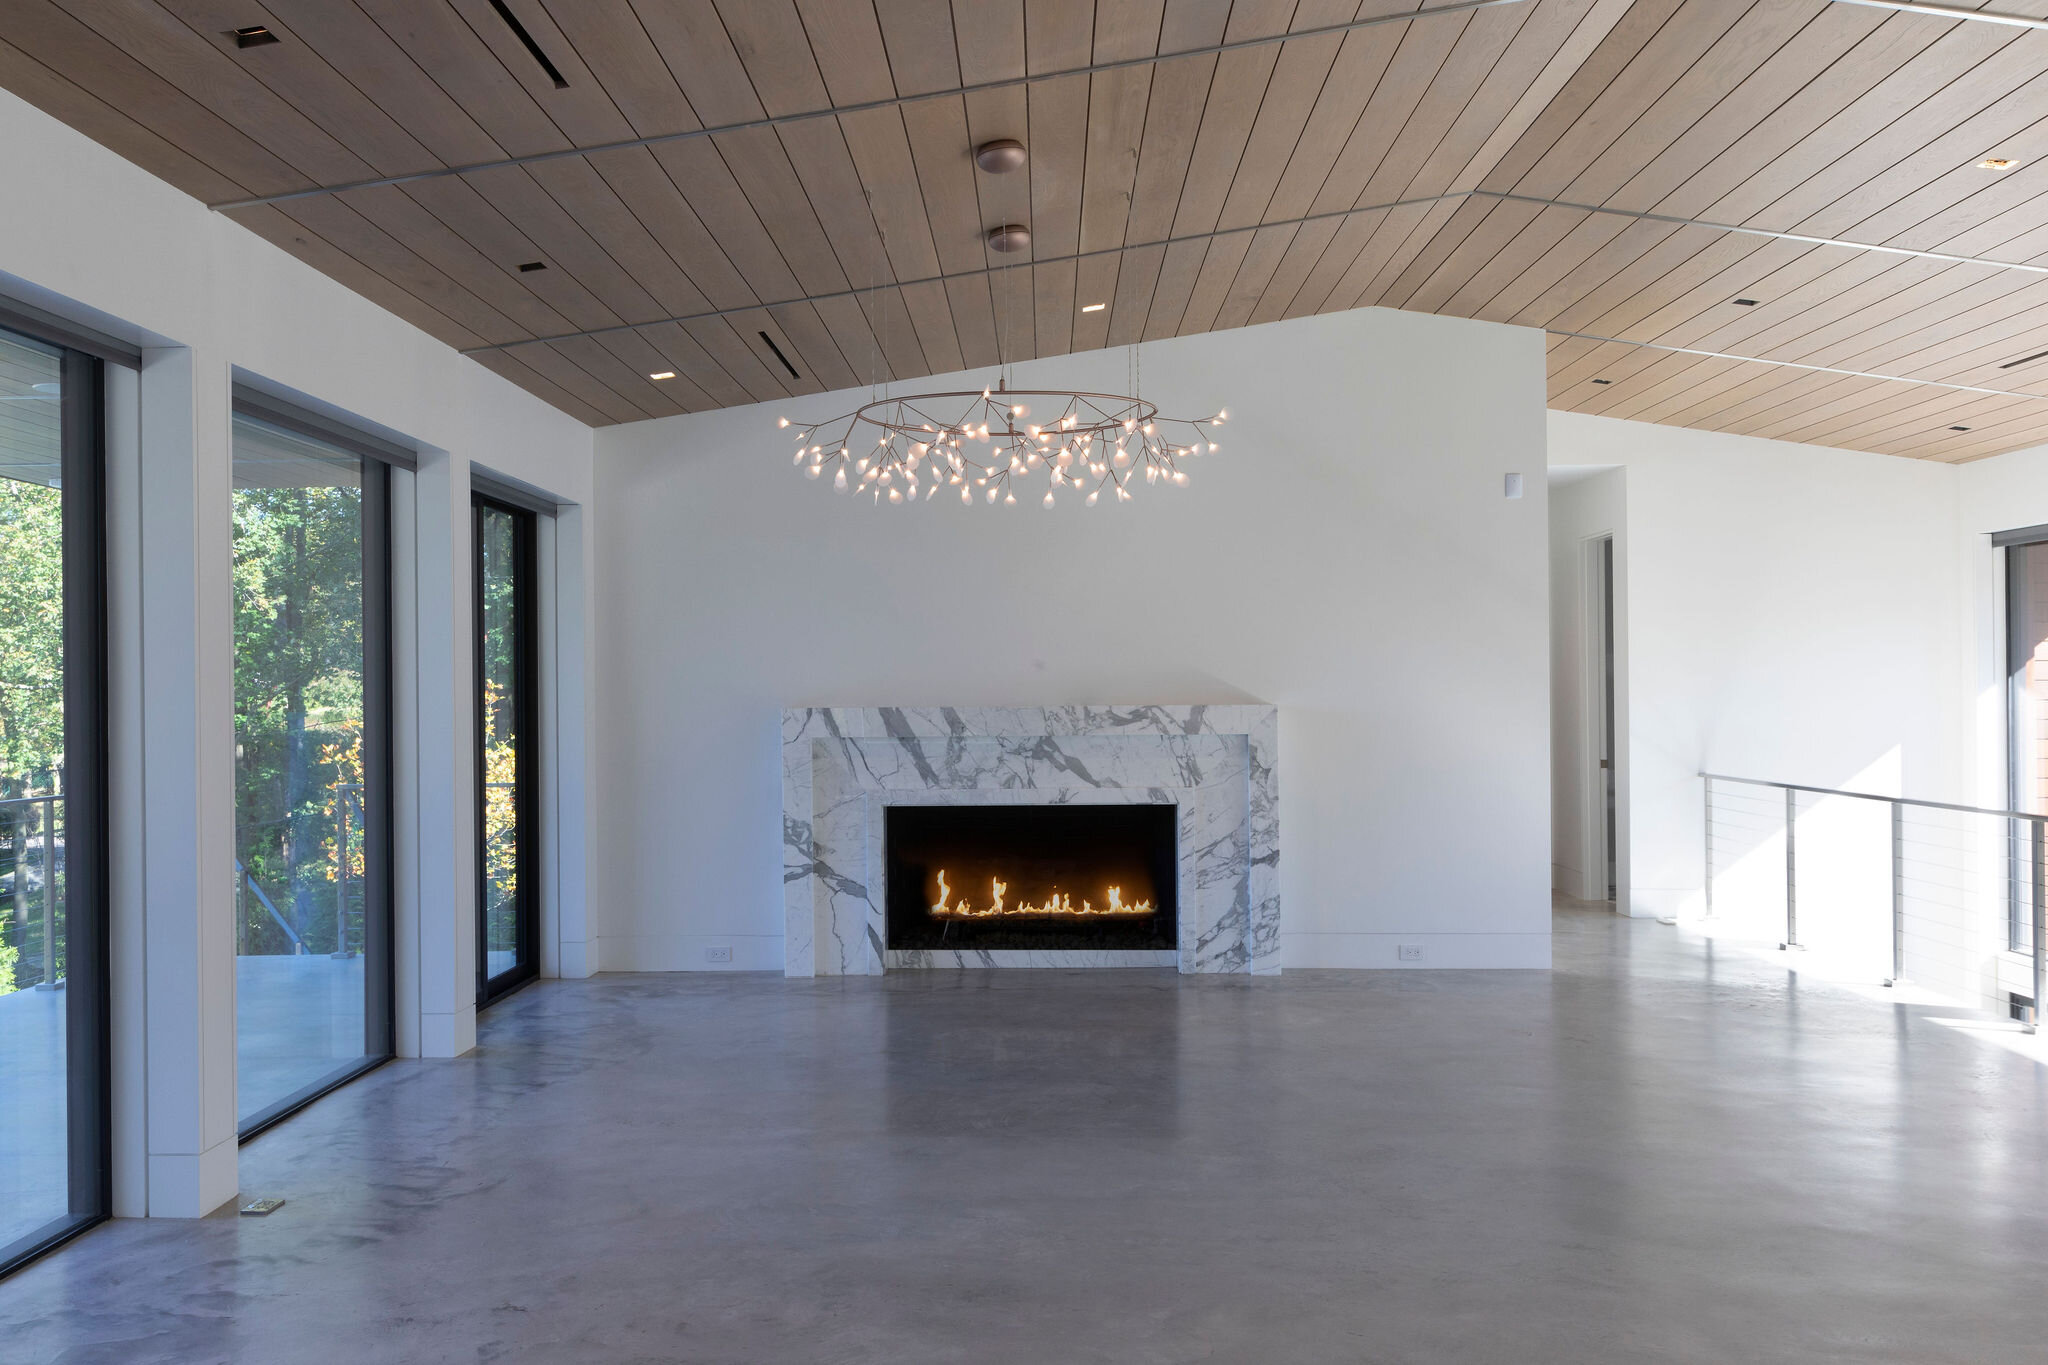  This Arabescato marble fireplace sets the welcoming tone to the living room. The chandelier references the Zen simplicity of the house and the leaves outside. 